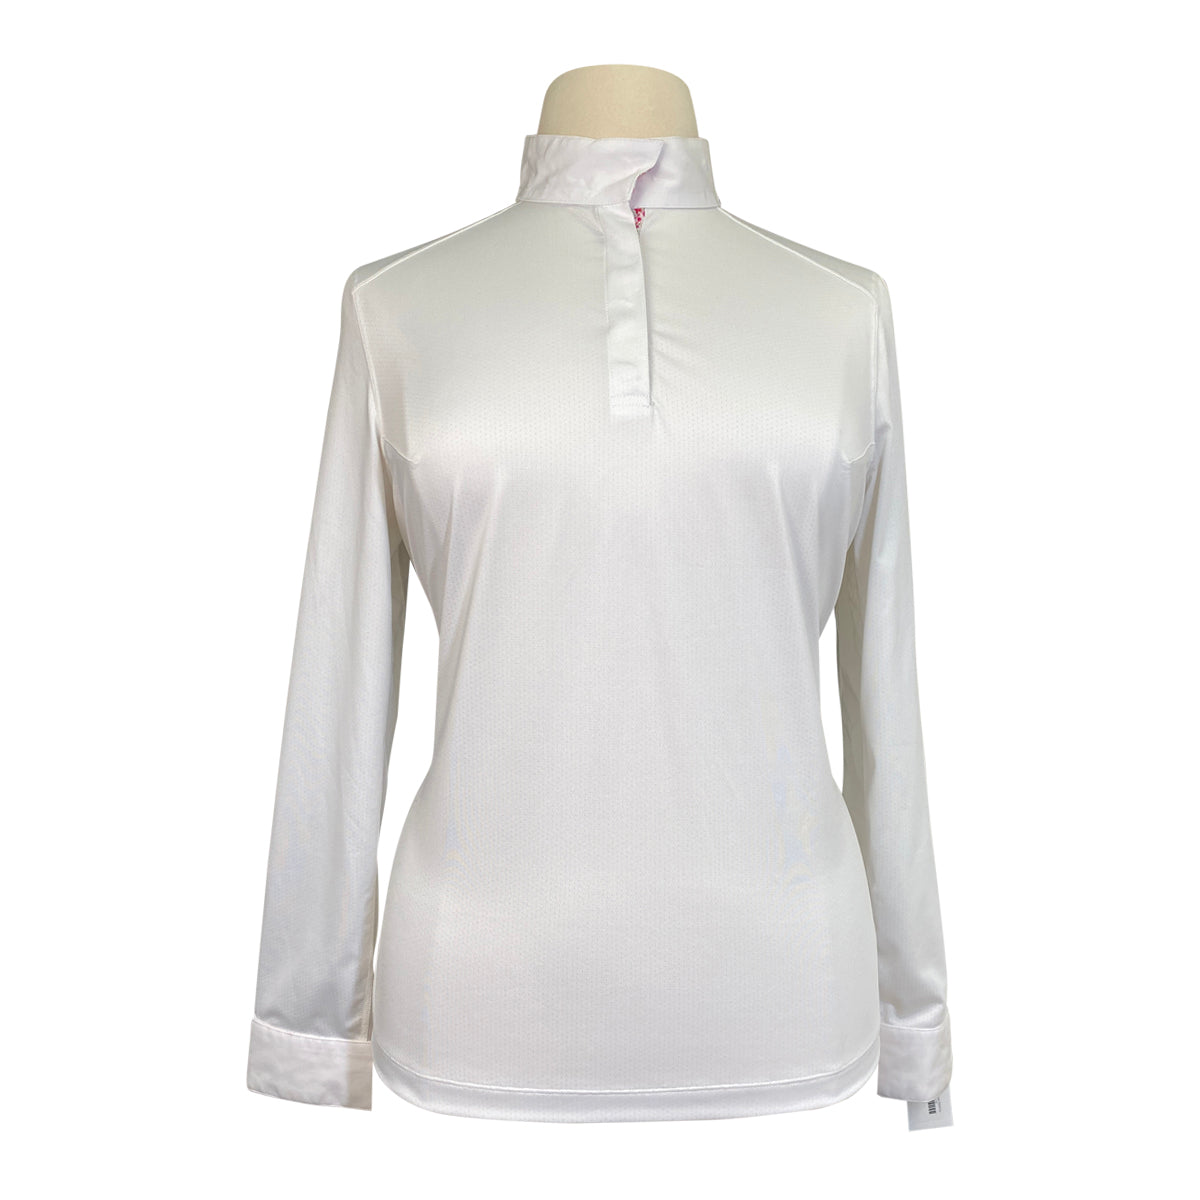 Dover Saddlery CoolBlast Show Shirt in White/Pink Flowers